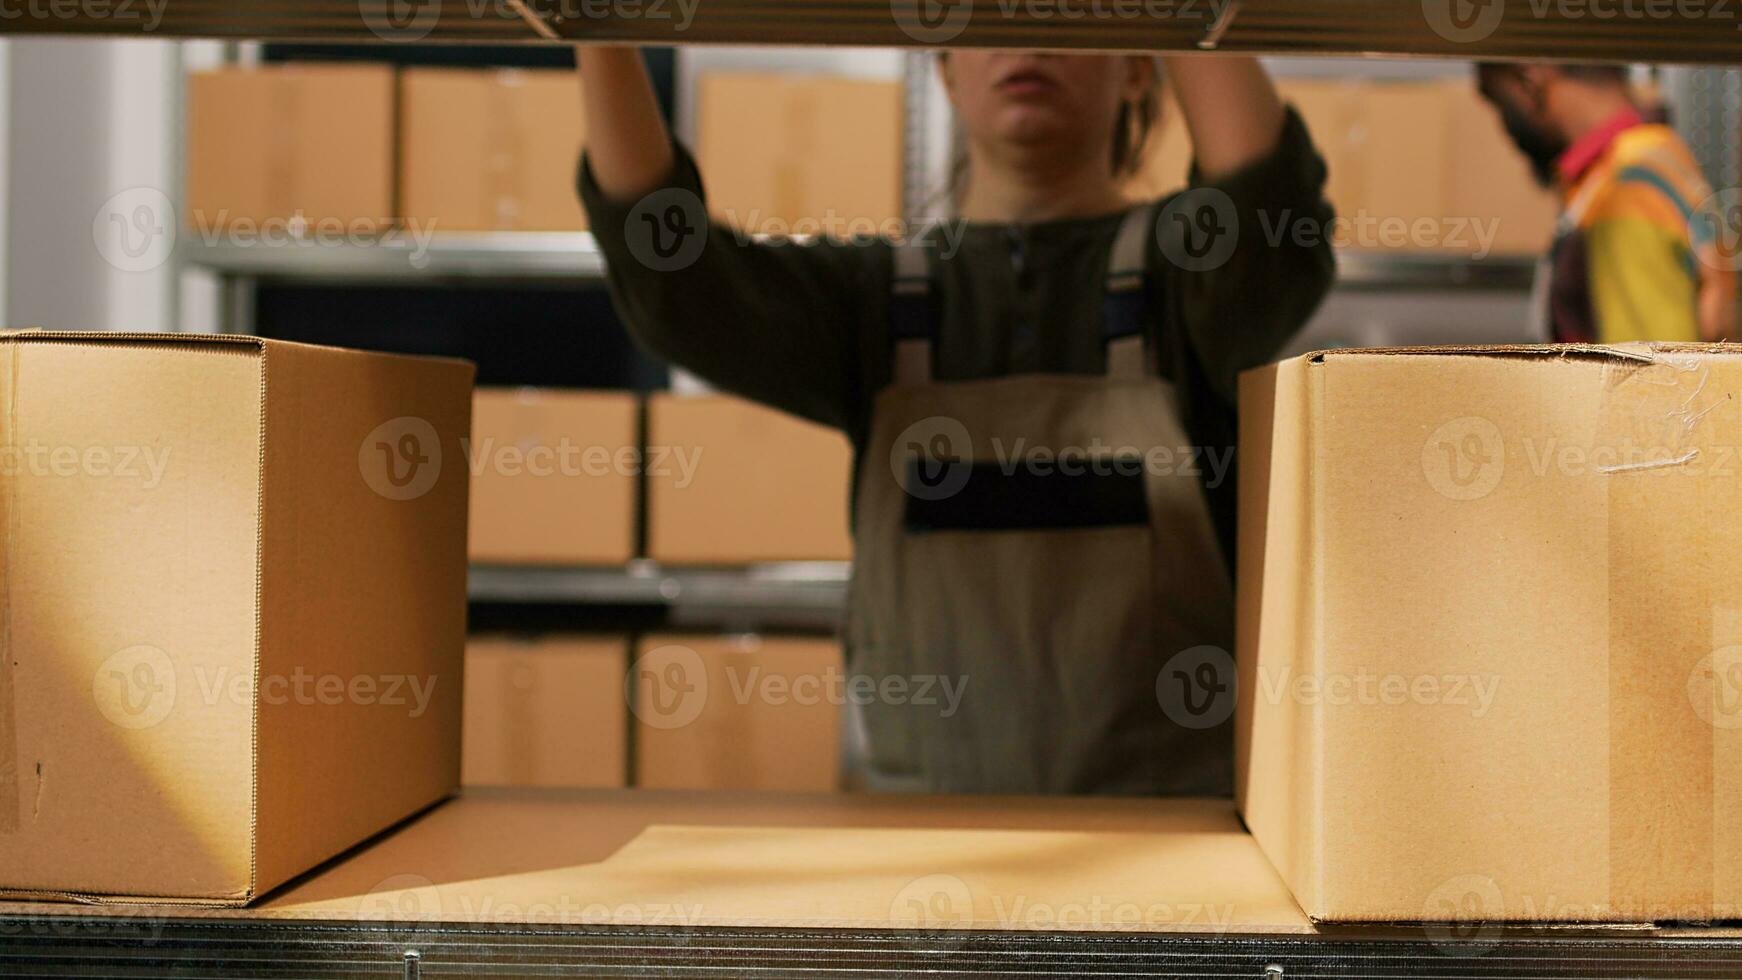 Female worker moving packs of goods, preparing order shipment for retail store business in storage room. Employee sorting boxes on racks in warehouse, supply chain and production. Tripod shot. photo